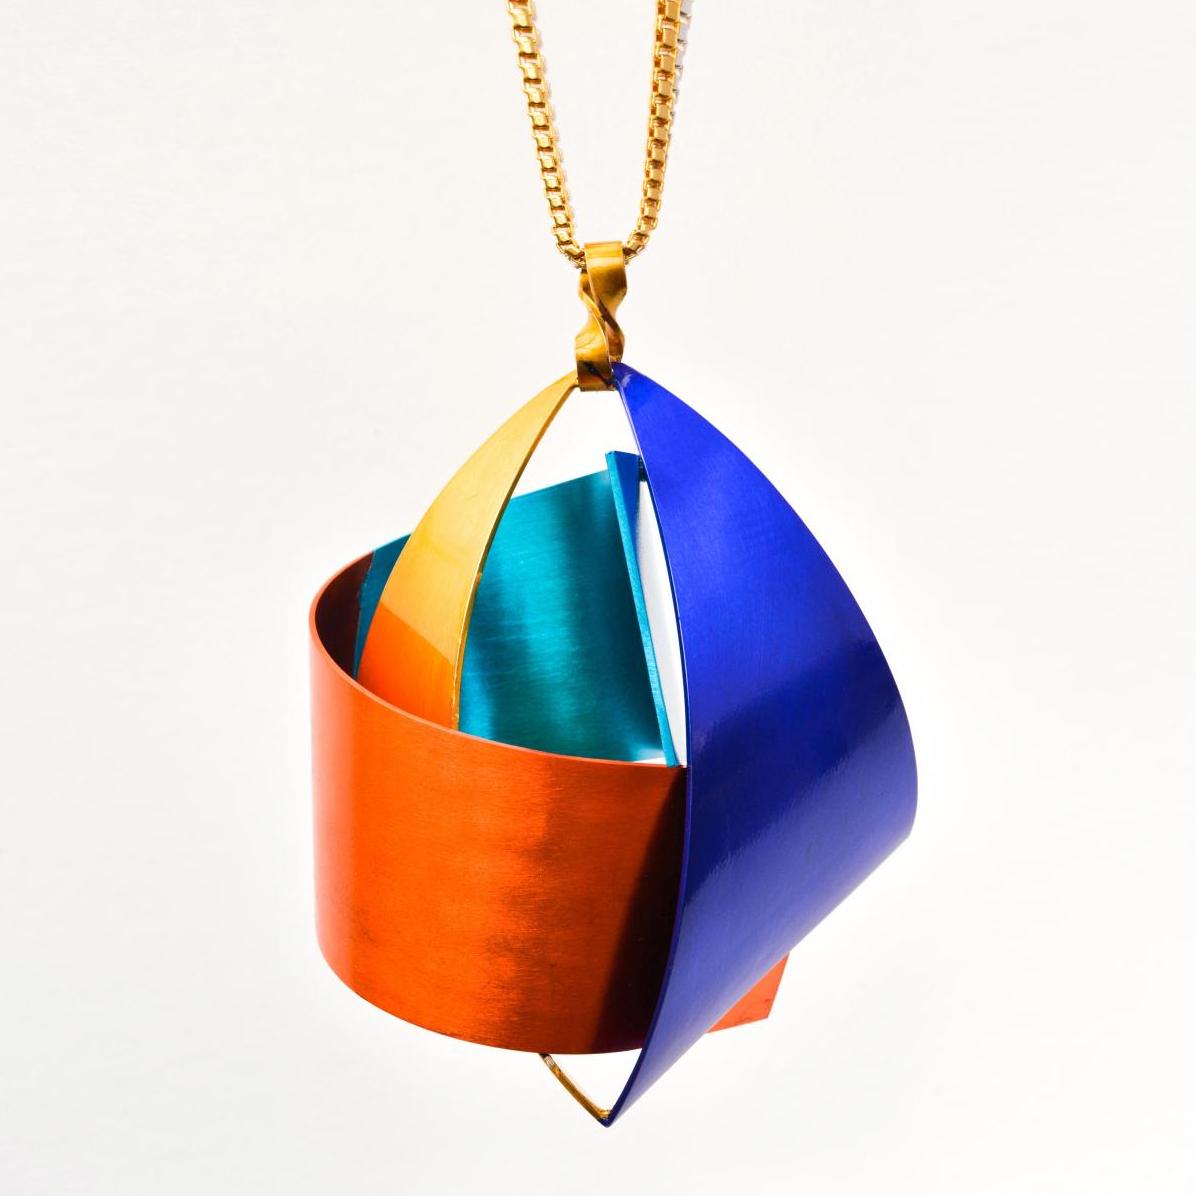 A Brilliant Showing by Artists' Jewellery - Market Trends